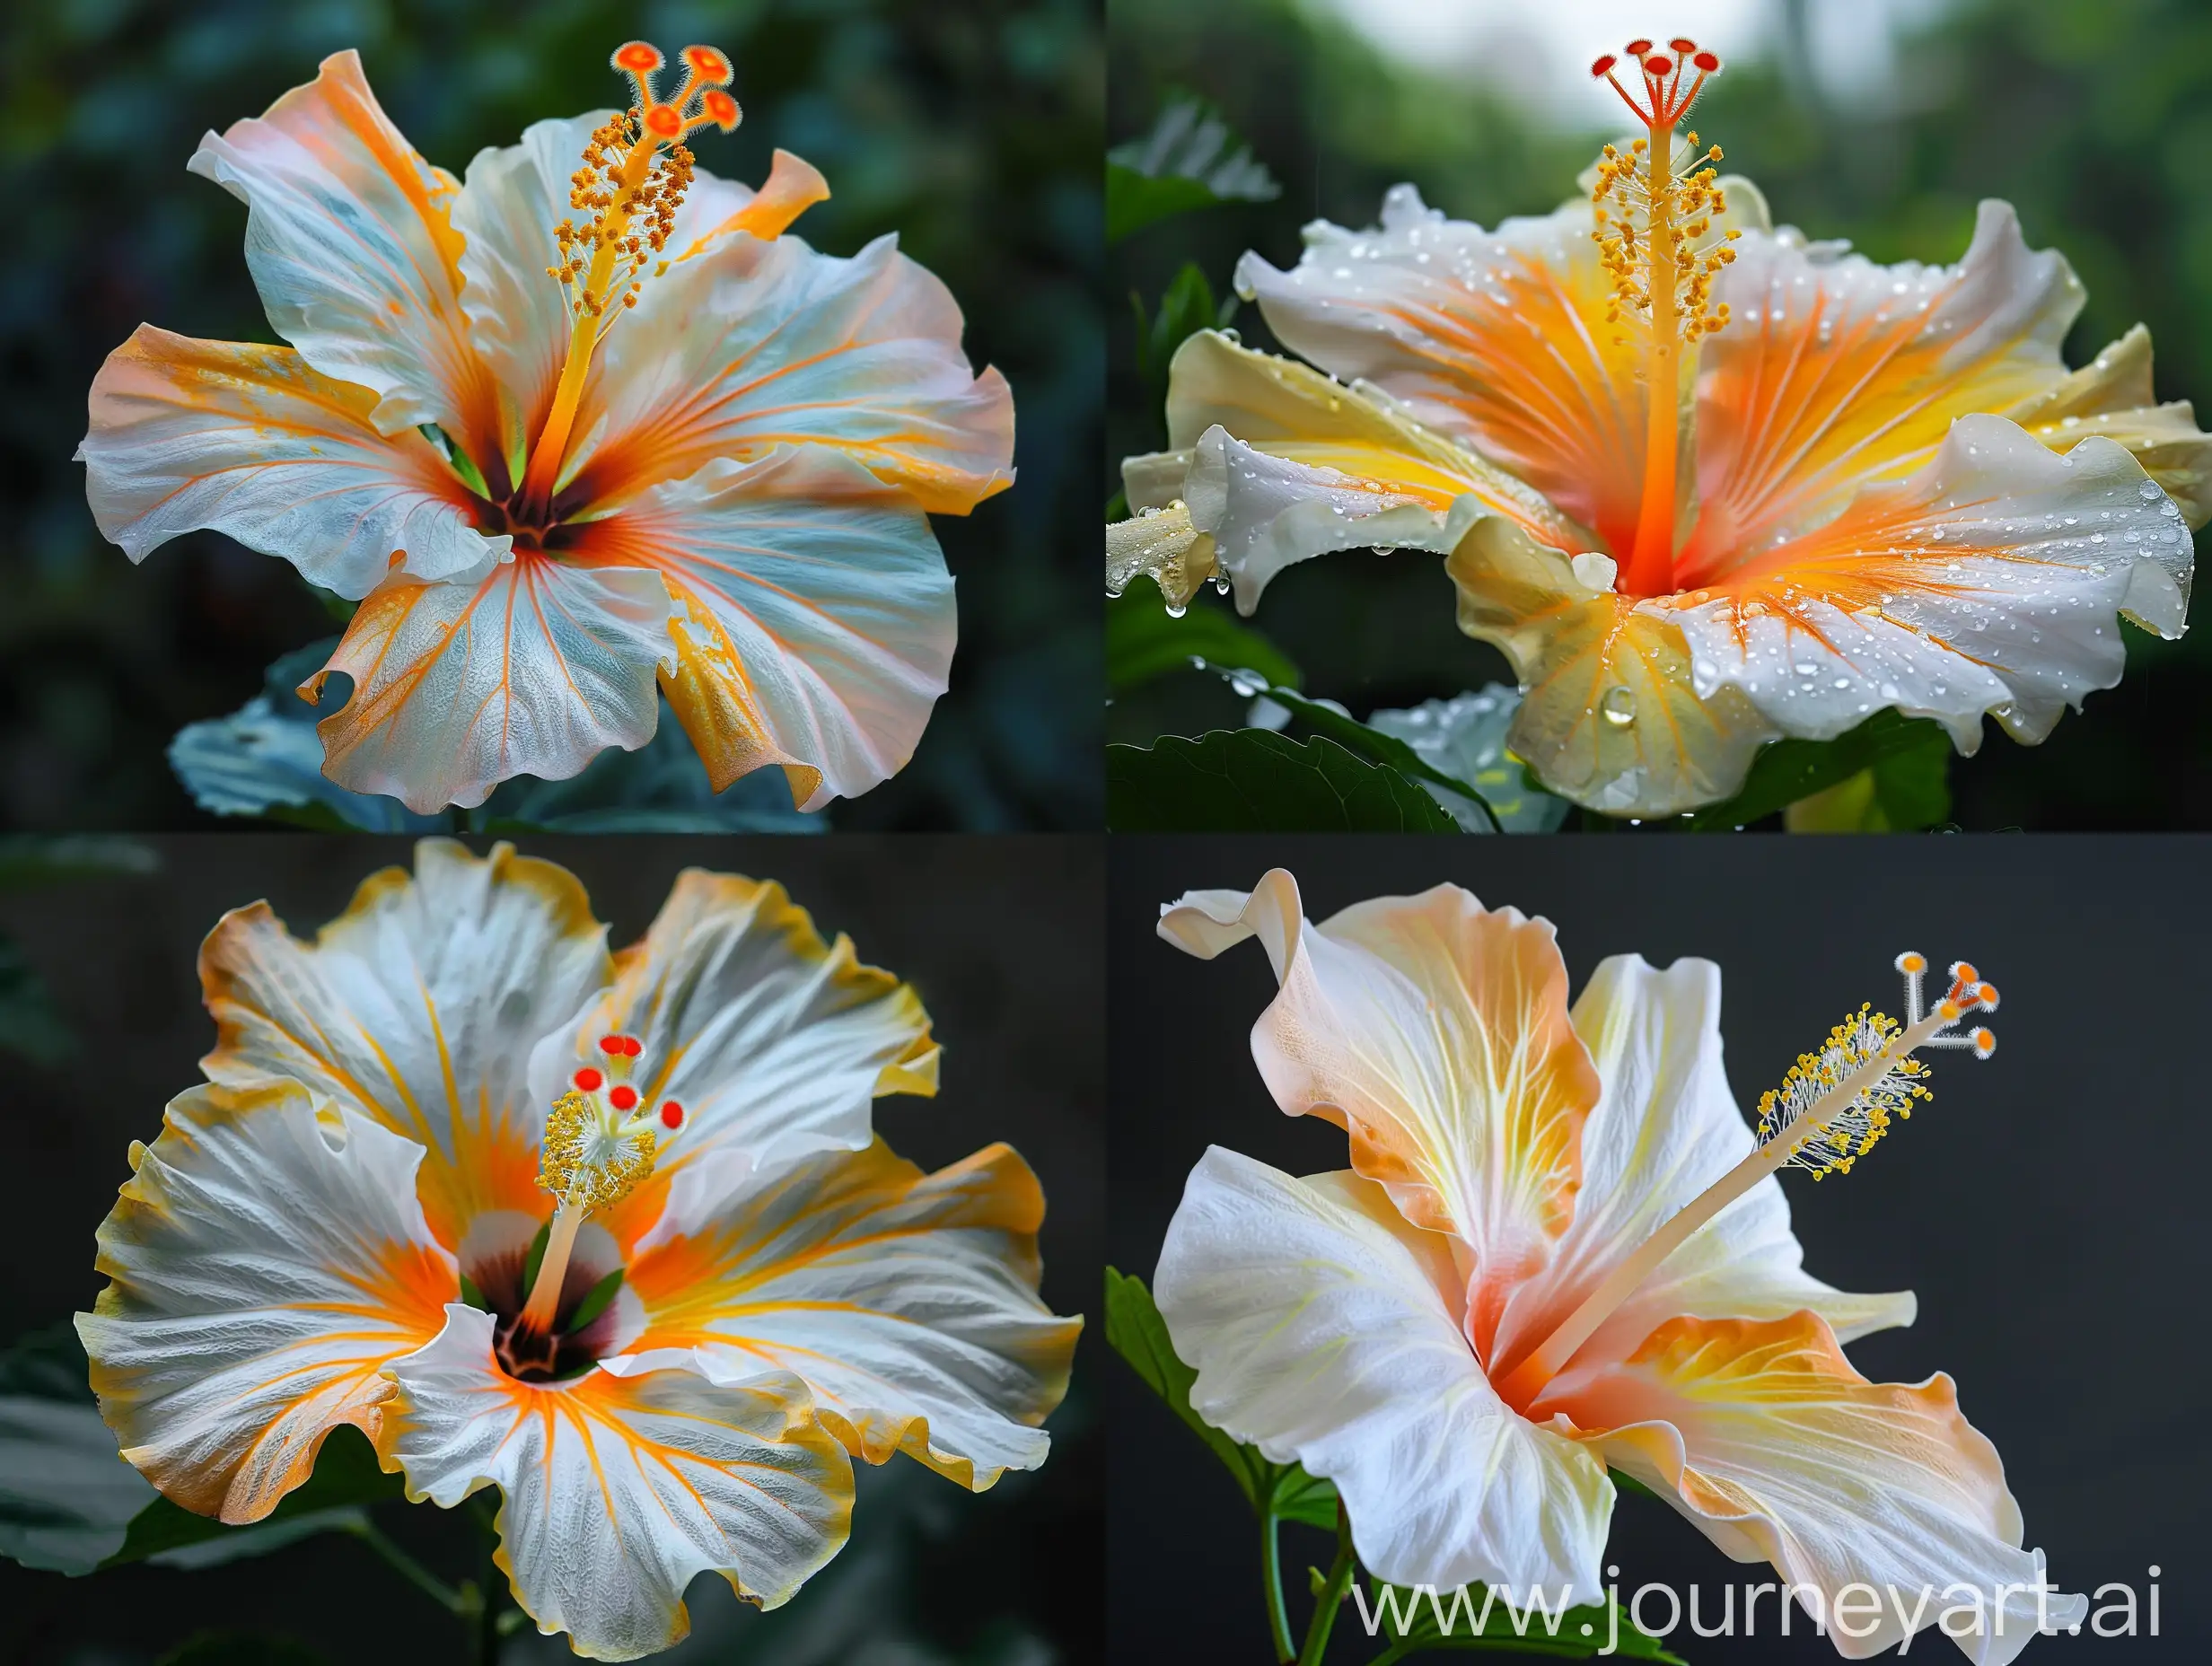 generate a unique tropical hibiscus flower with shallow depth of filed. the flower colours must be white, orange and yellow